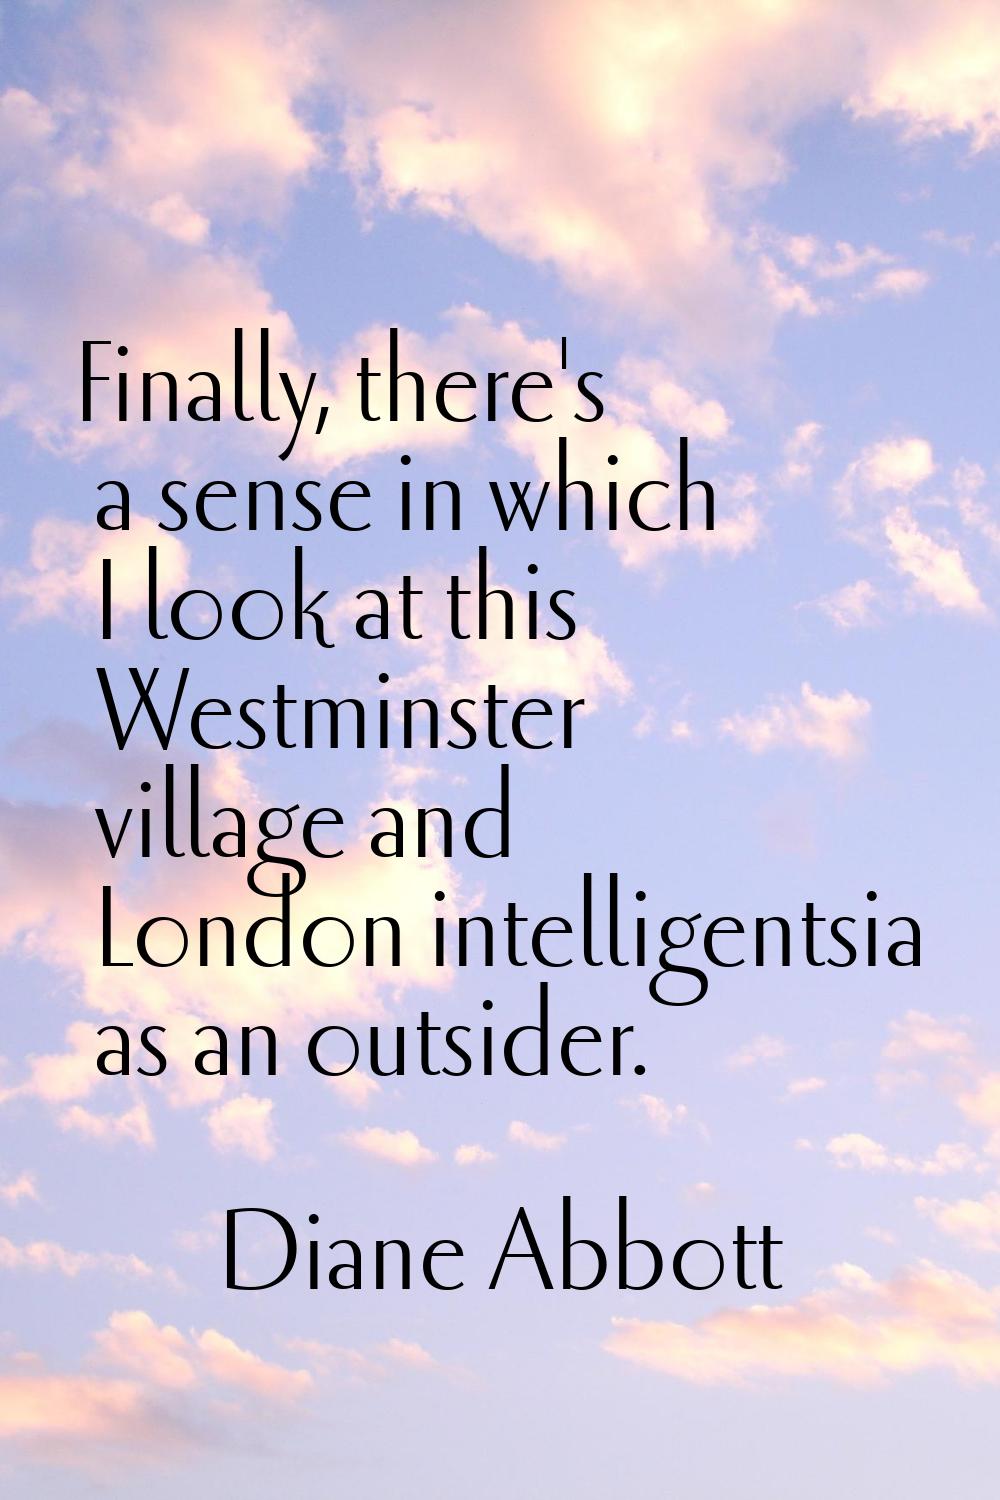 Finally, there's a sense in which I look at this Westminster village and London intelligentsia as a